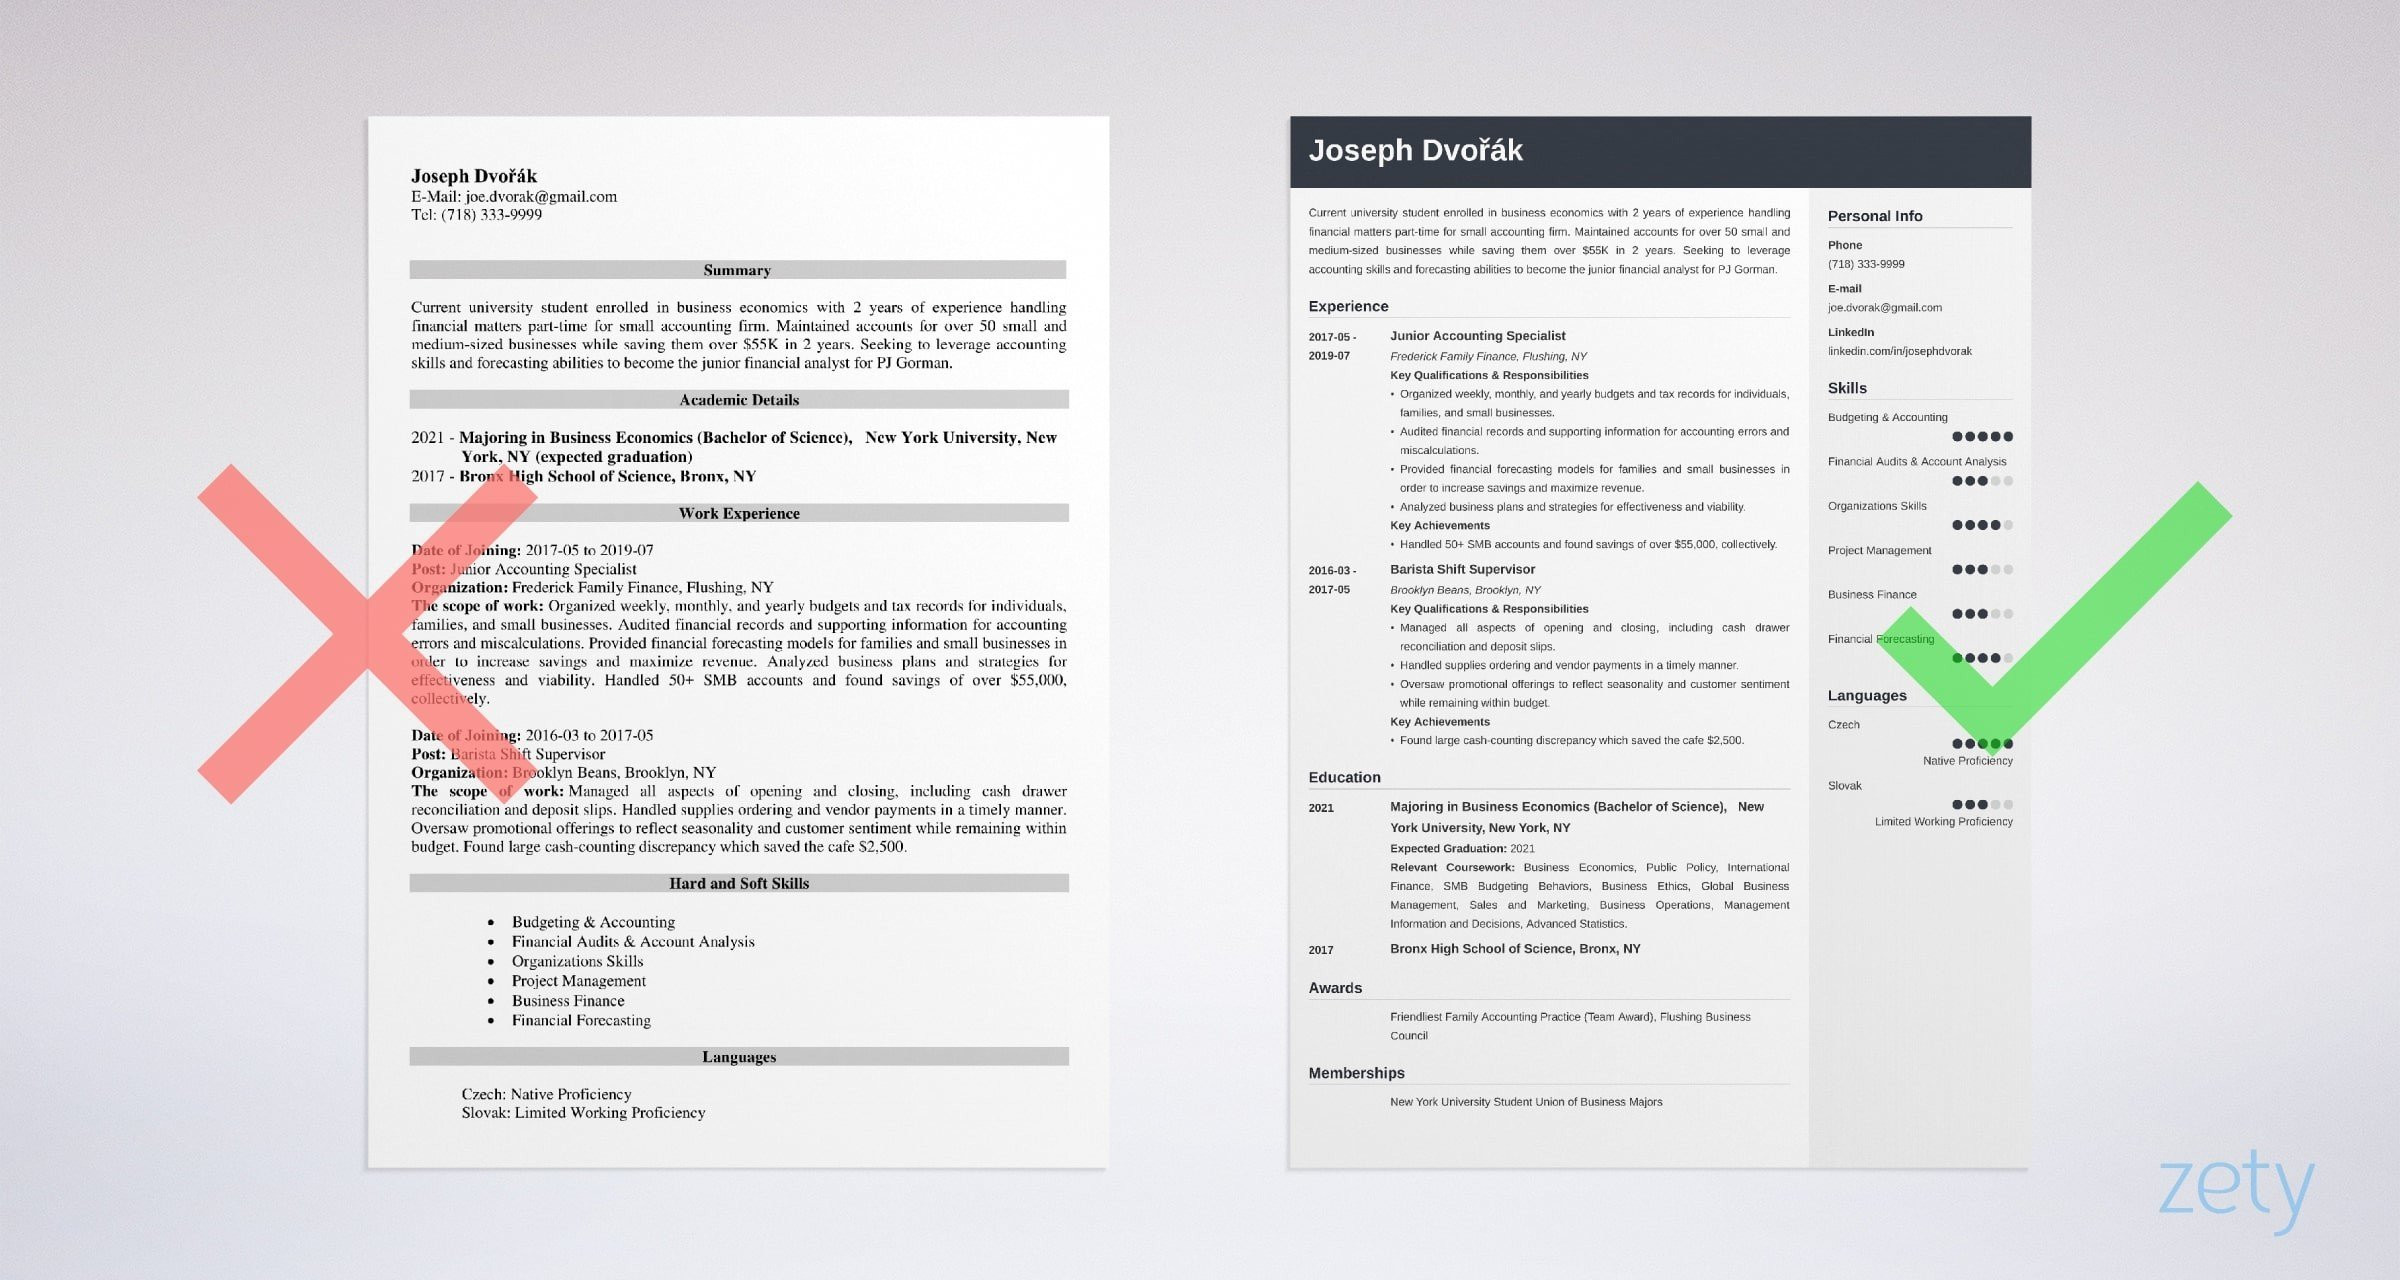 Sample Resume for when You are Still In College Undergraduate College Student Resume Template & Guide